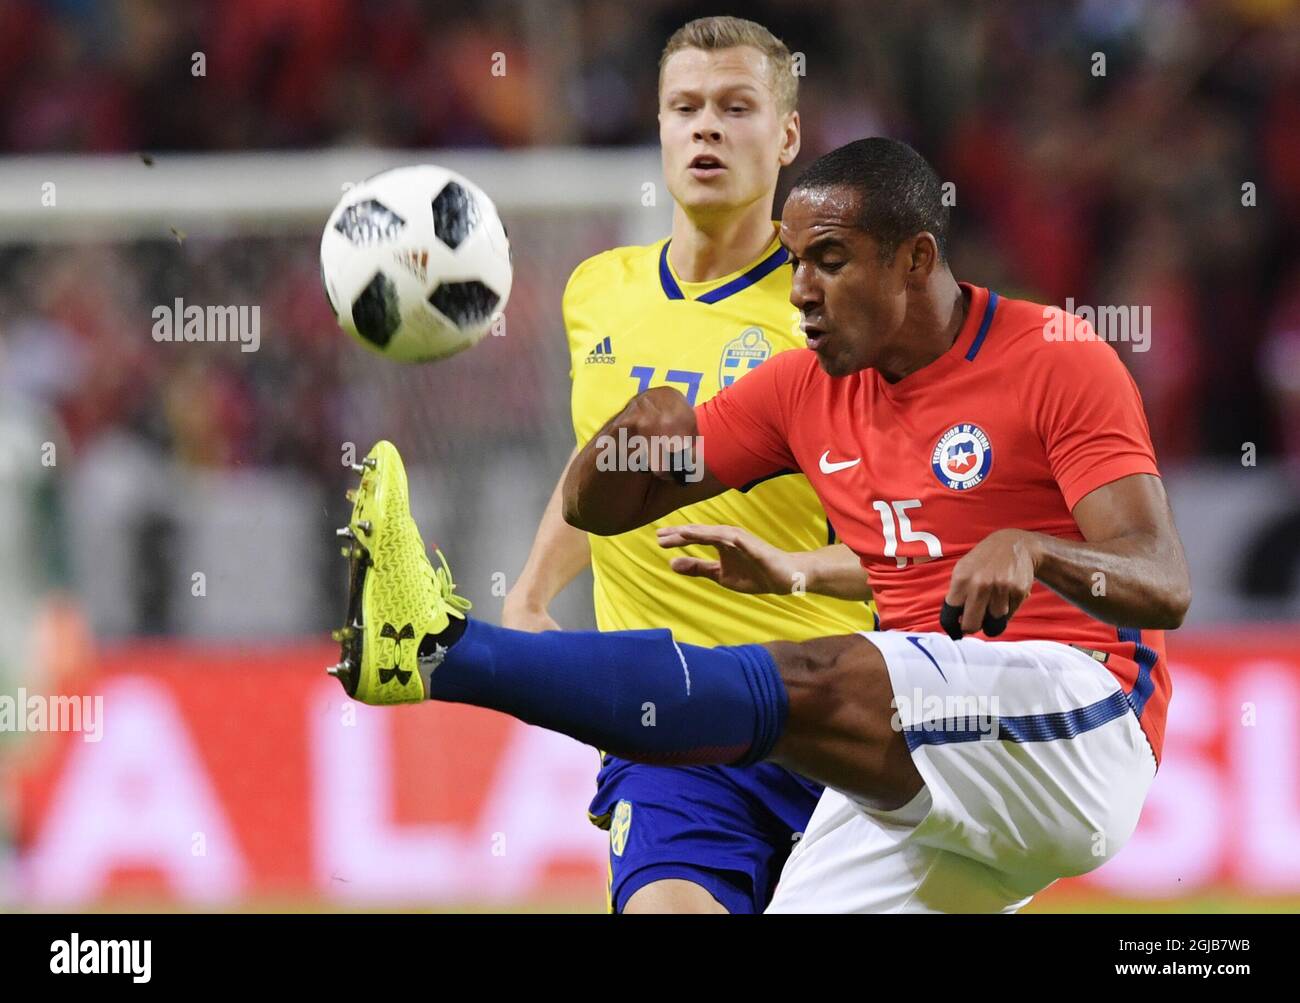 Sweden's Viktor Claesson (L) fights for the ball tiwh Chile's Jean Beausejour during the international friendly soccer match between Sweden and Chile at Friends Arena in Solna, Stockholm, on March 24, 2018. Photo: Anders Wiklund / TT / 10040  Stock Photo